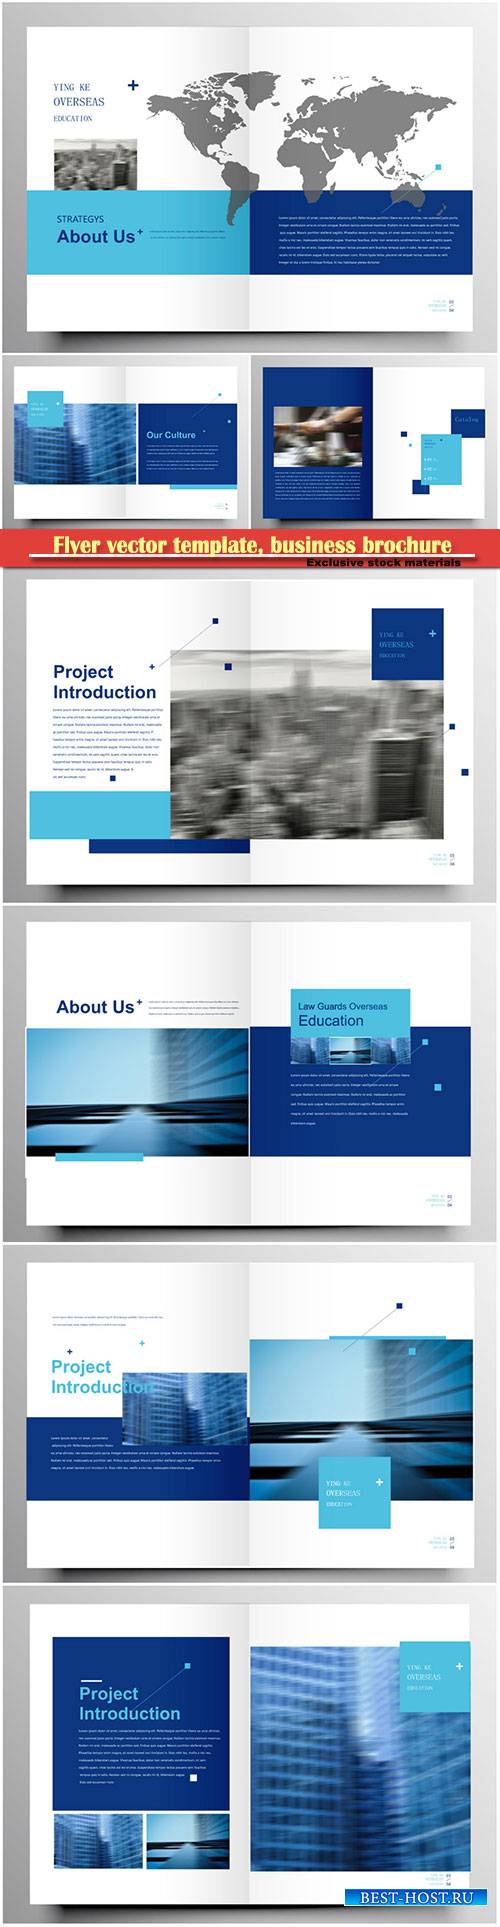 Flyer vector template, business brochure, magazine cover # 9